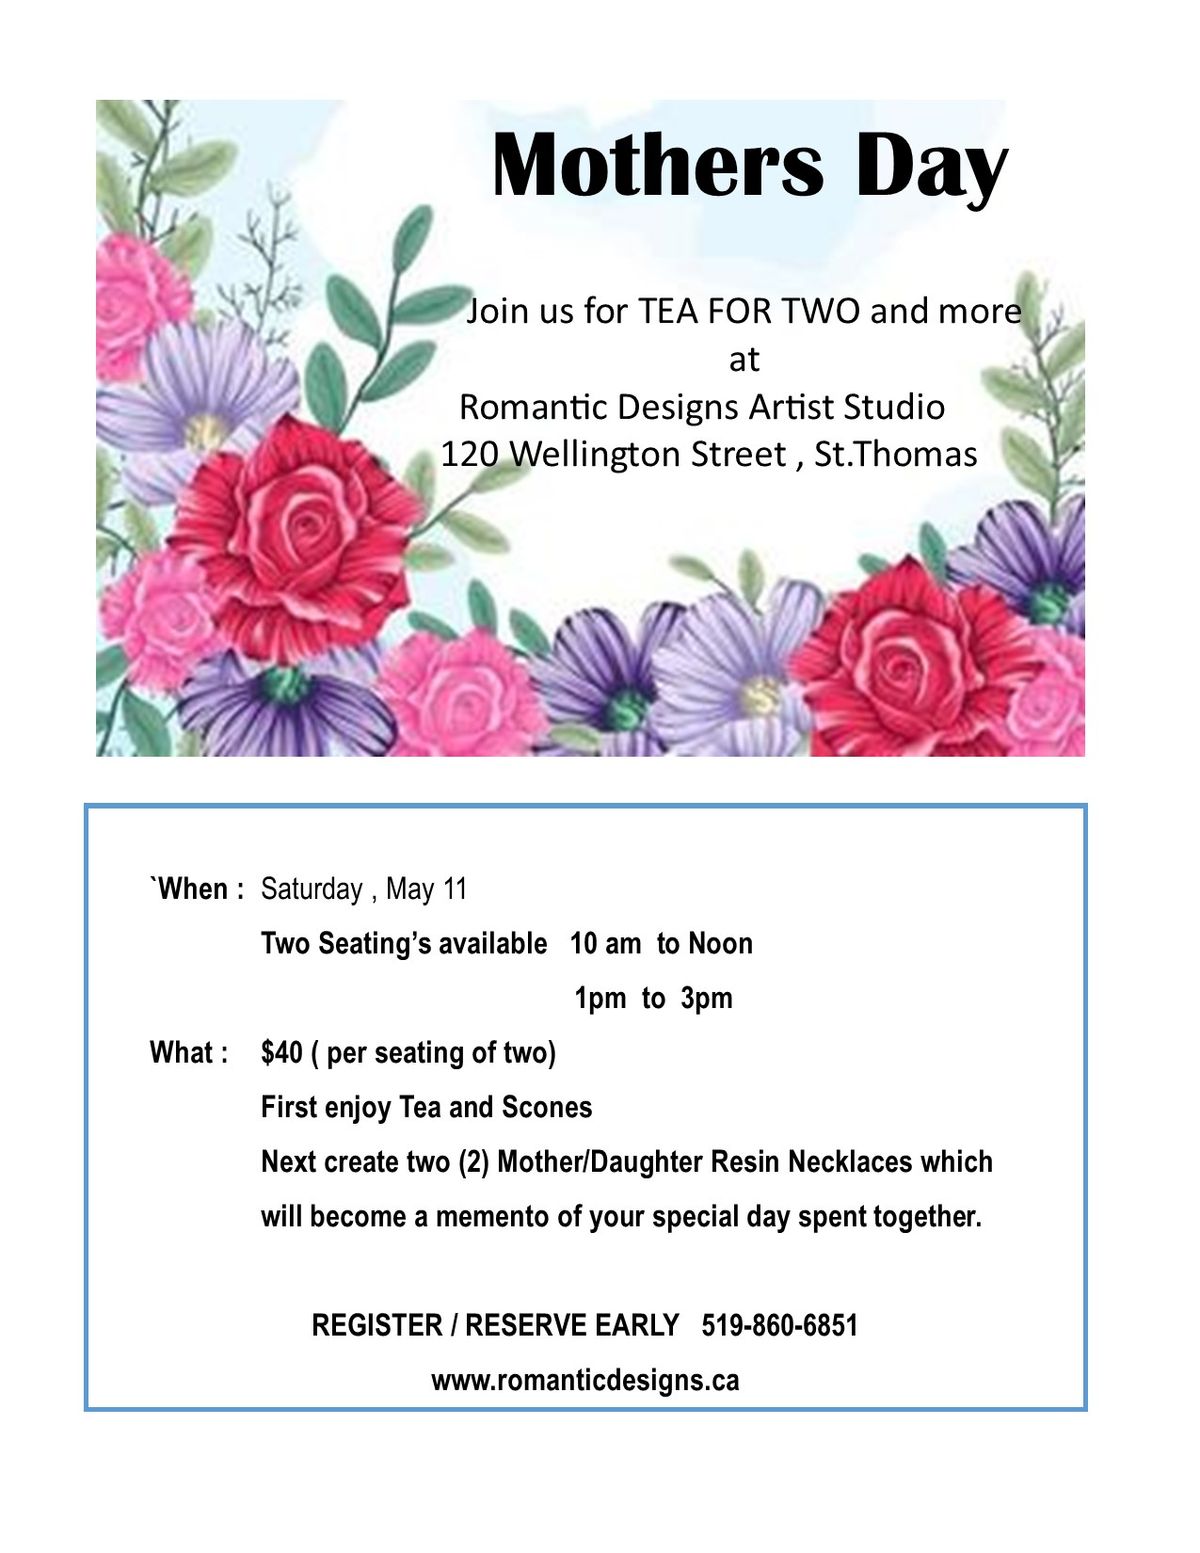 Mothers Day - Tea For Two and More......